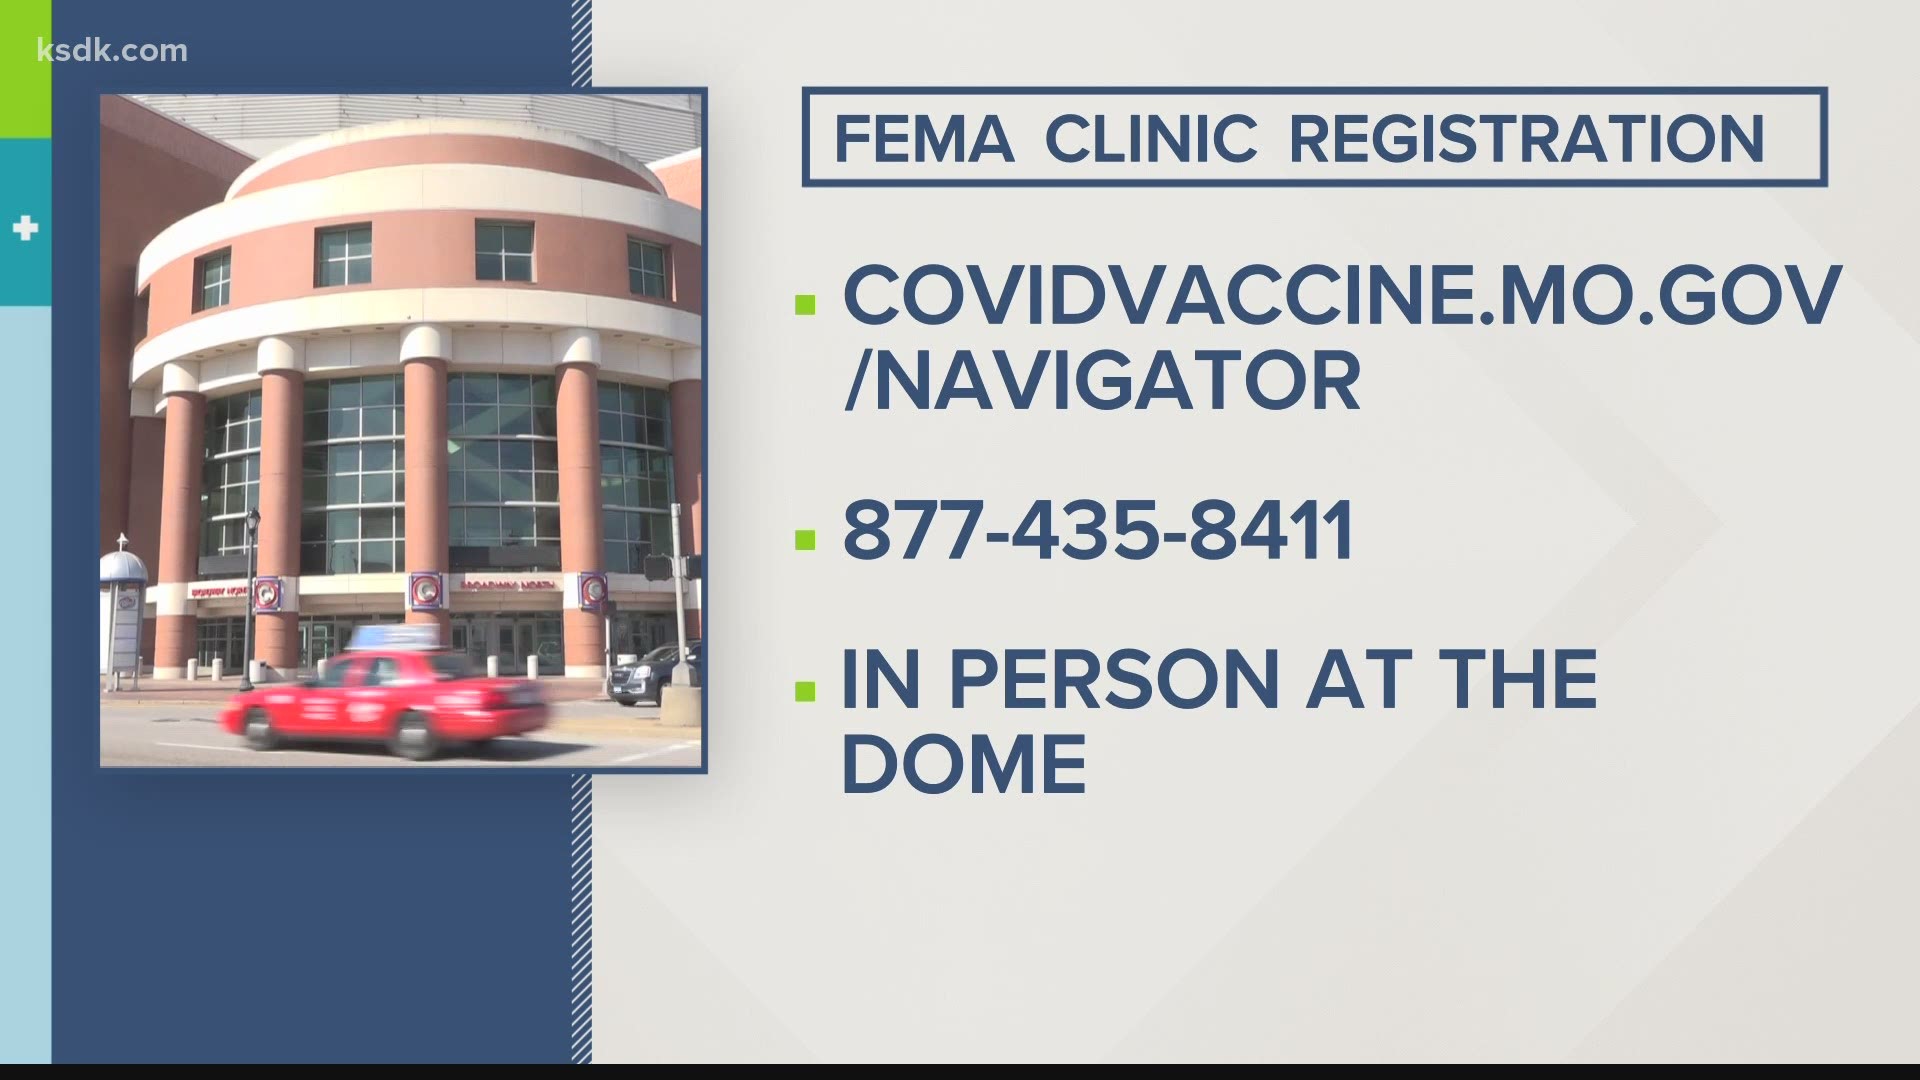 FEMA will begin vaccinating people at The Dome starting Wednesday.